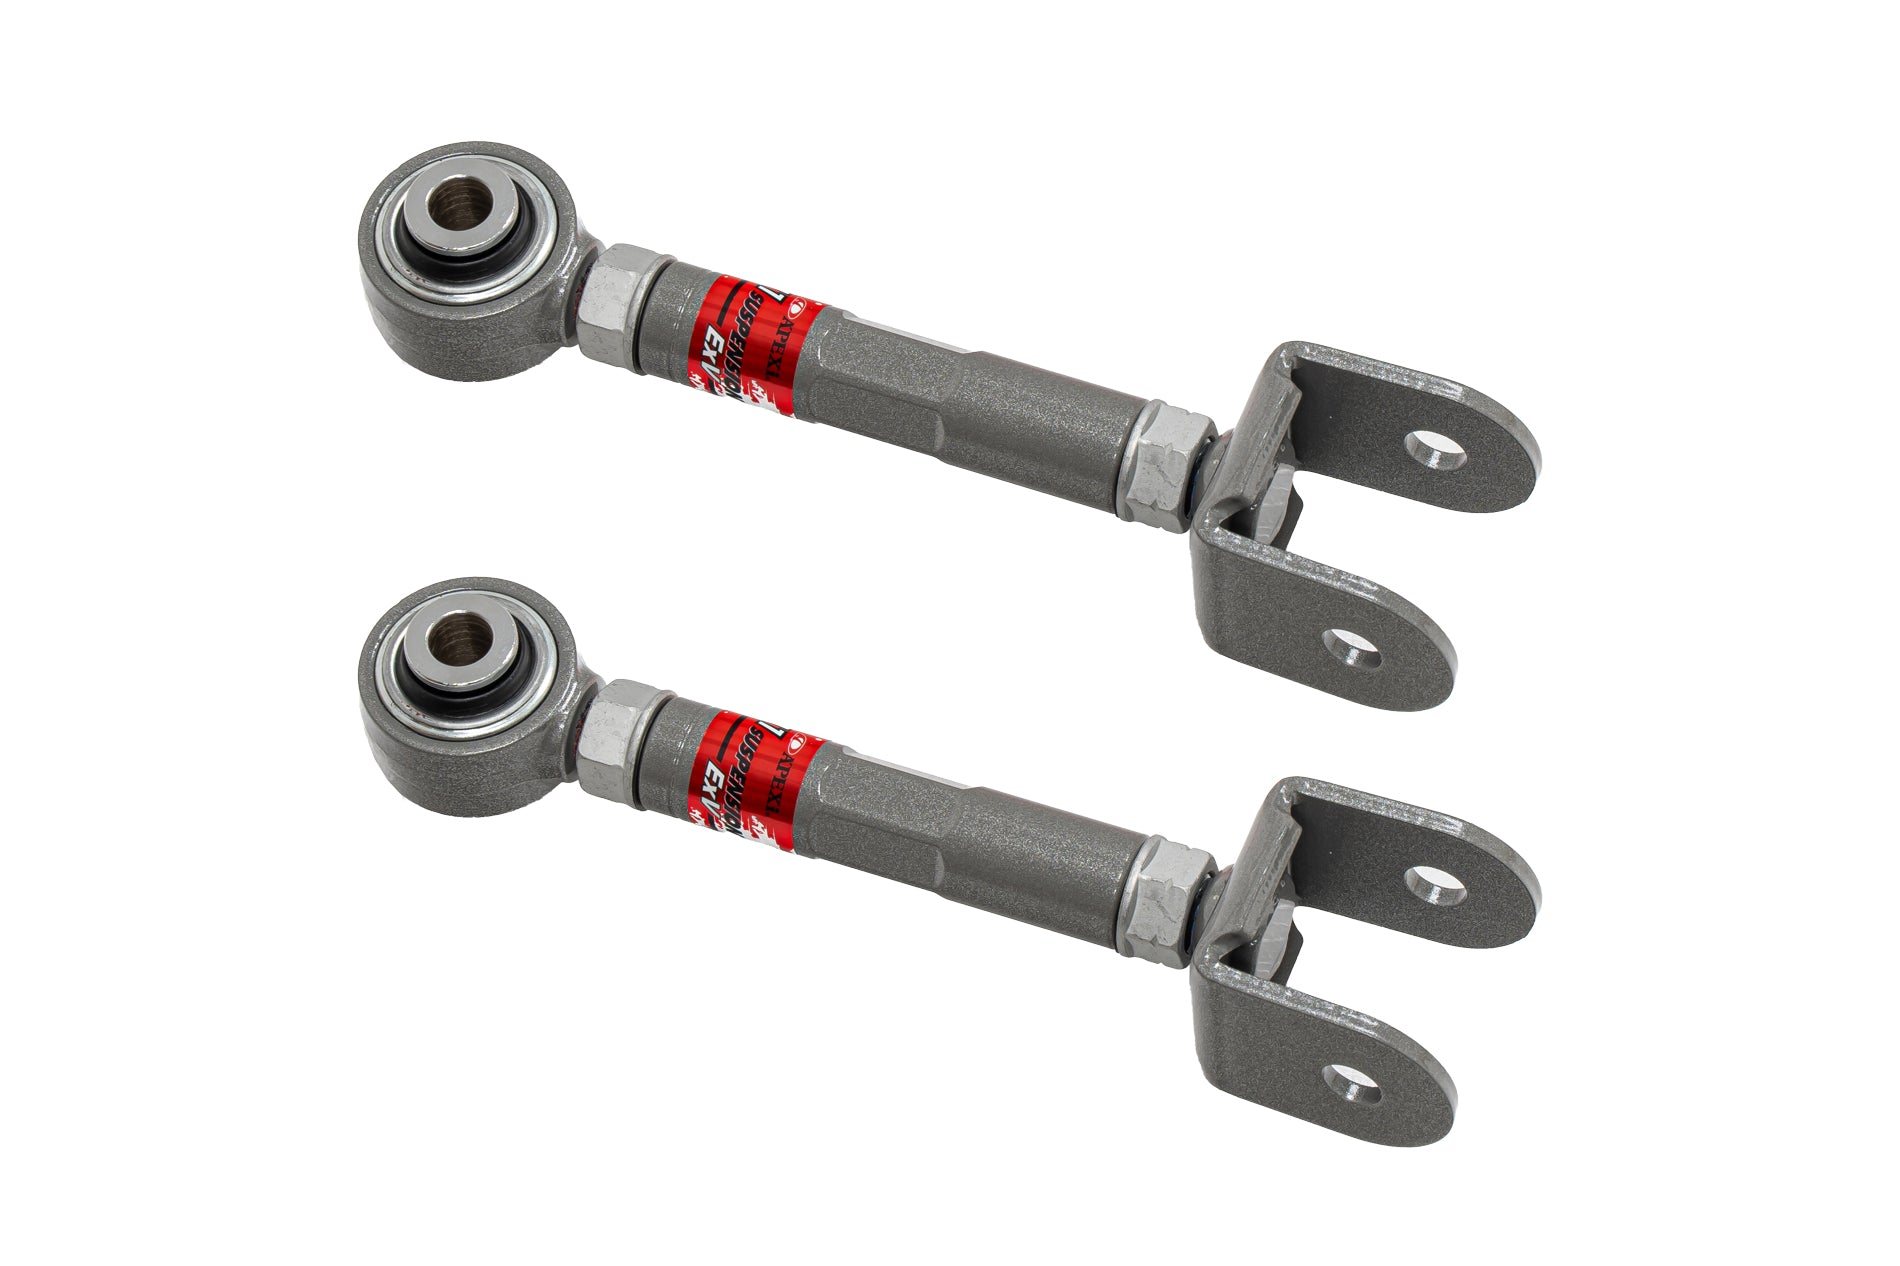 A'PEXi - EXV Rear Traction Rod (Pillow Ball) - Nissan S13 / S14 / S15 / R32 / R33 / R34 / Z32 / C33 / C34 / C35 / A31